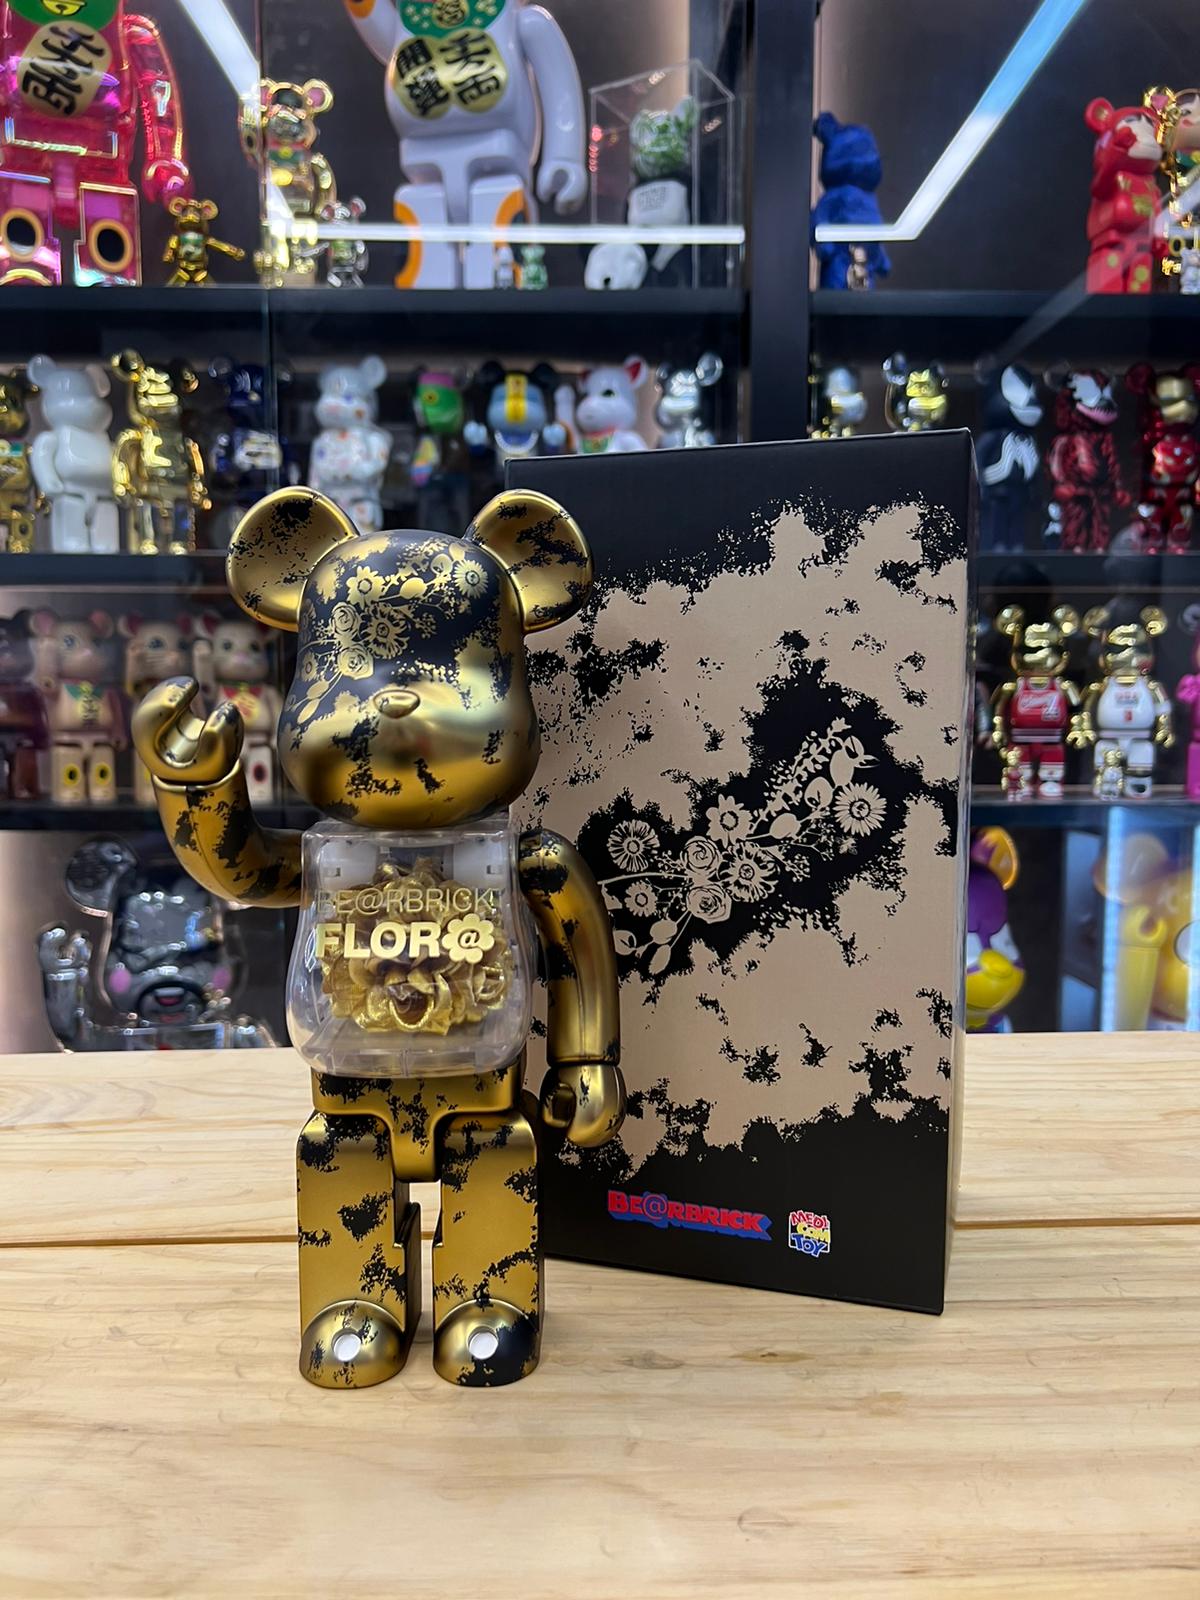 400% be@rbrick Flor@ Gold – Madmaxtoys